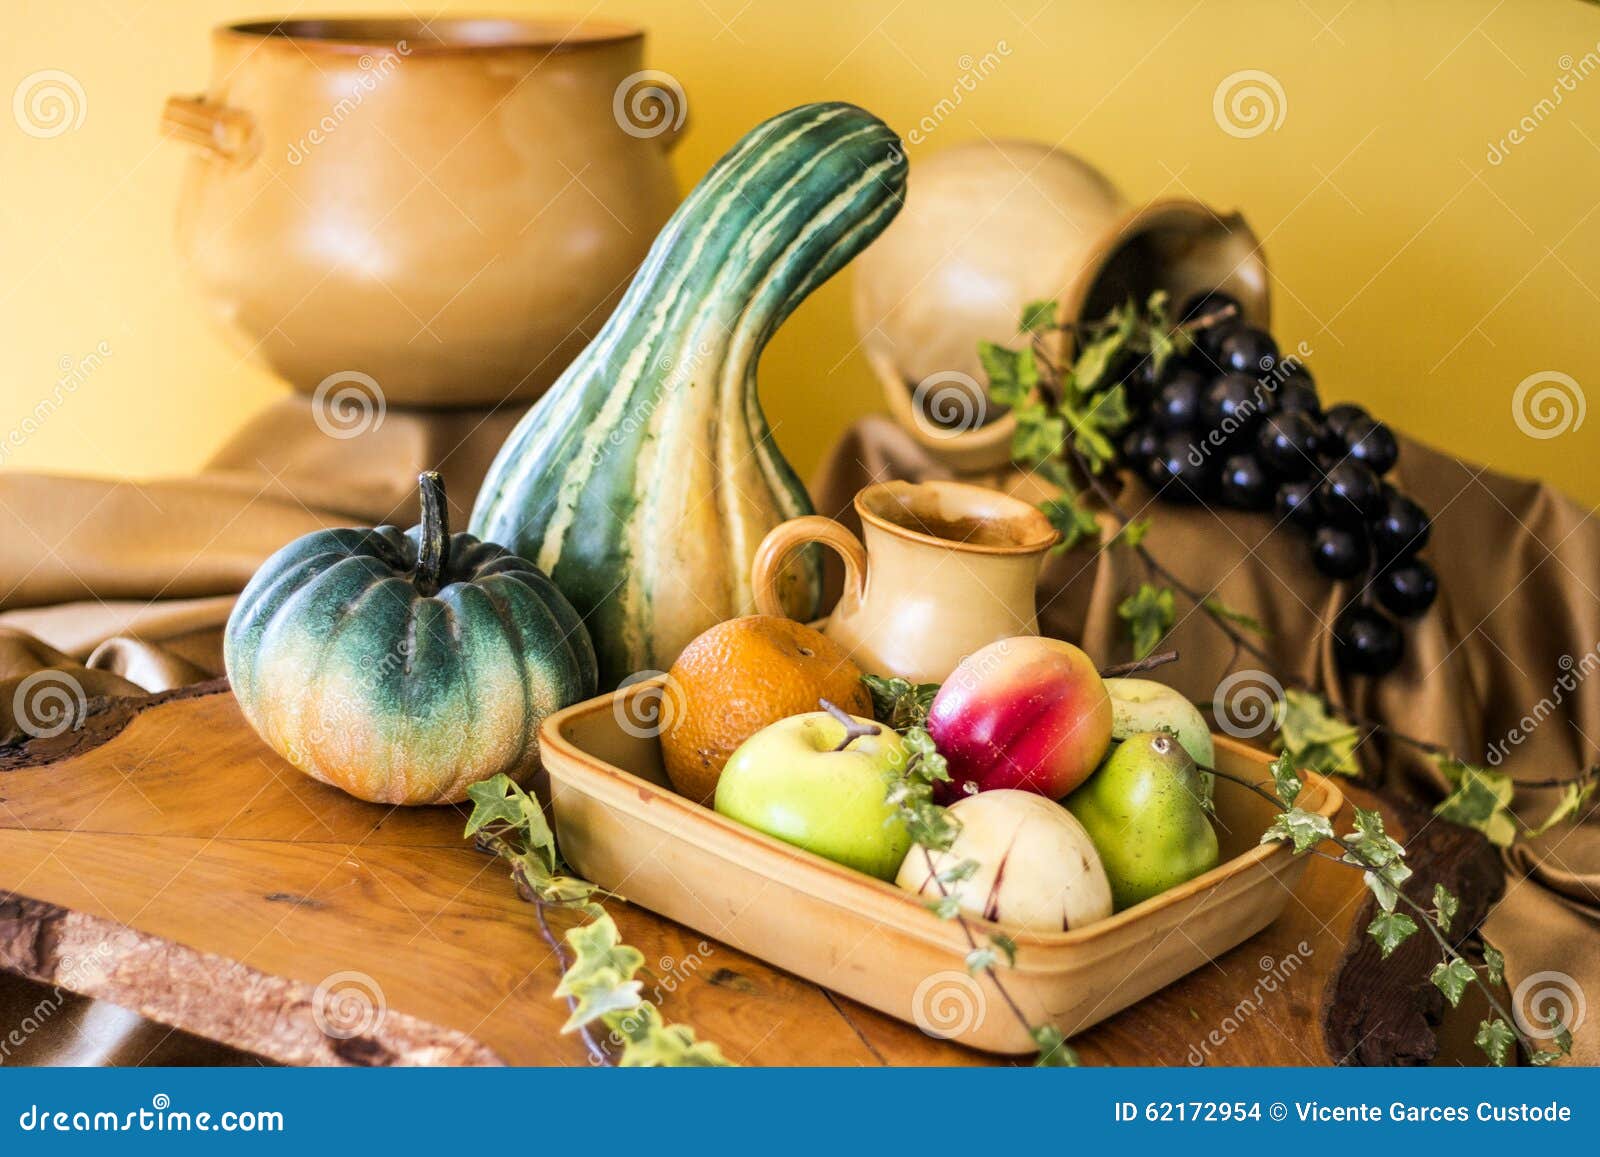 fruits vegetable and ceramic still life